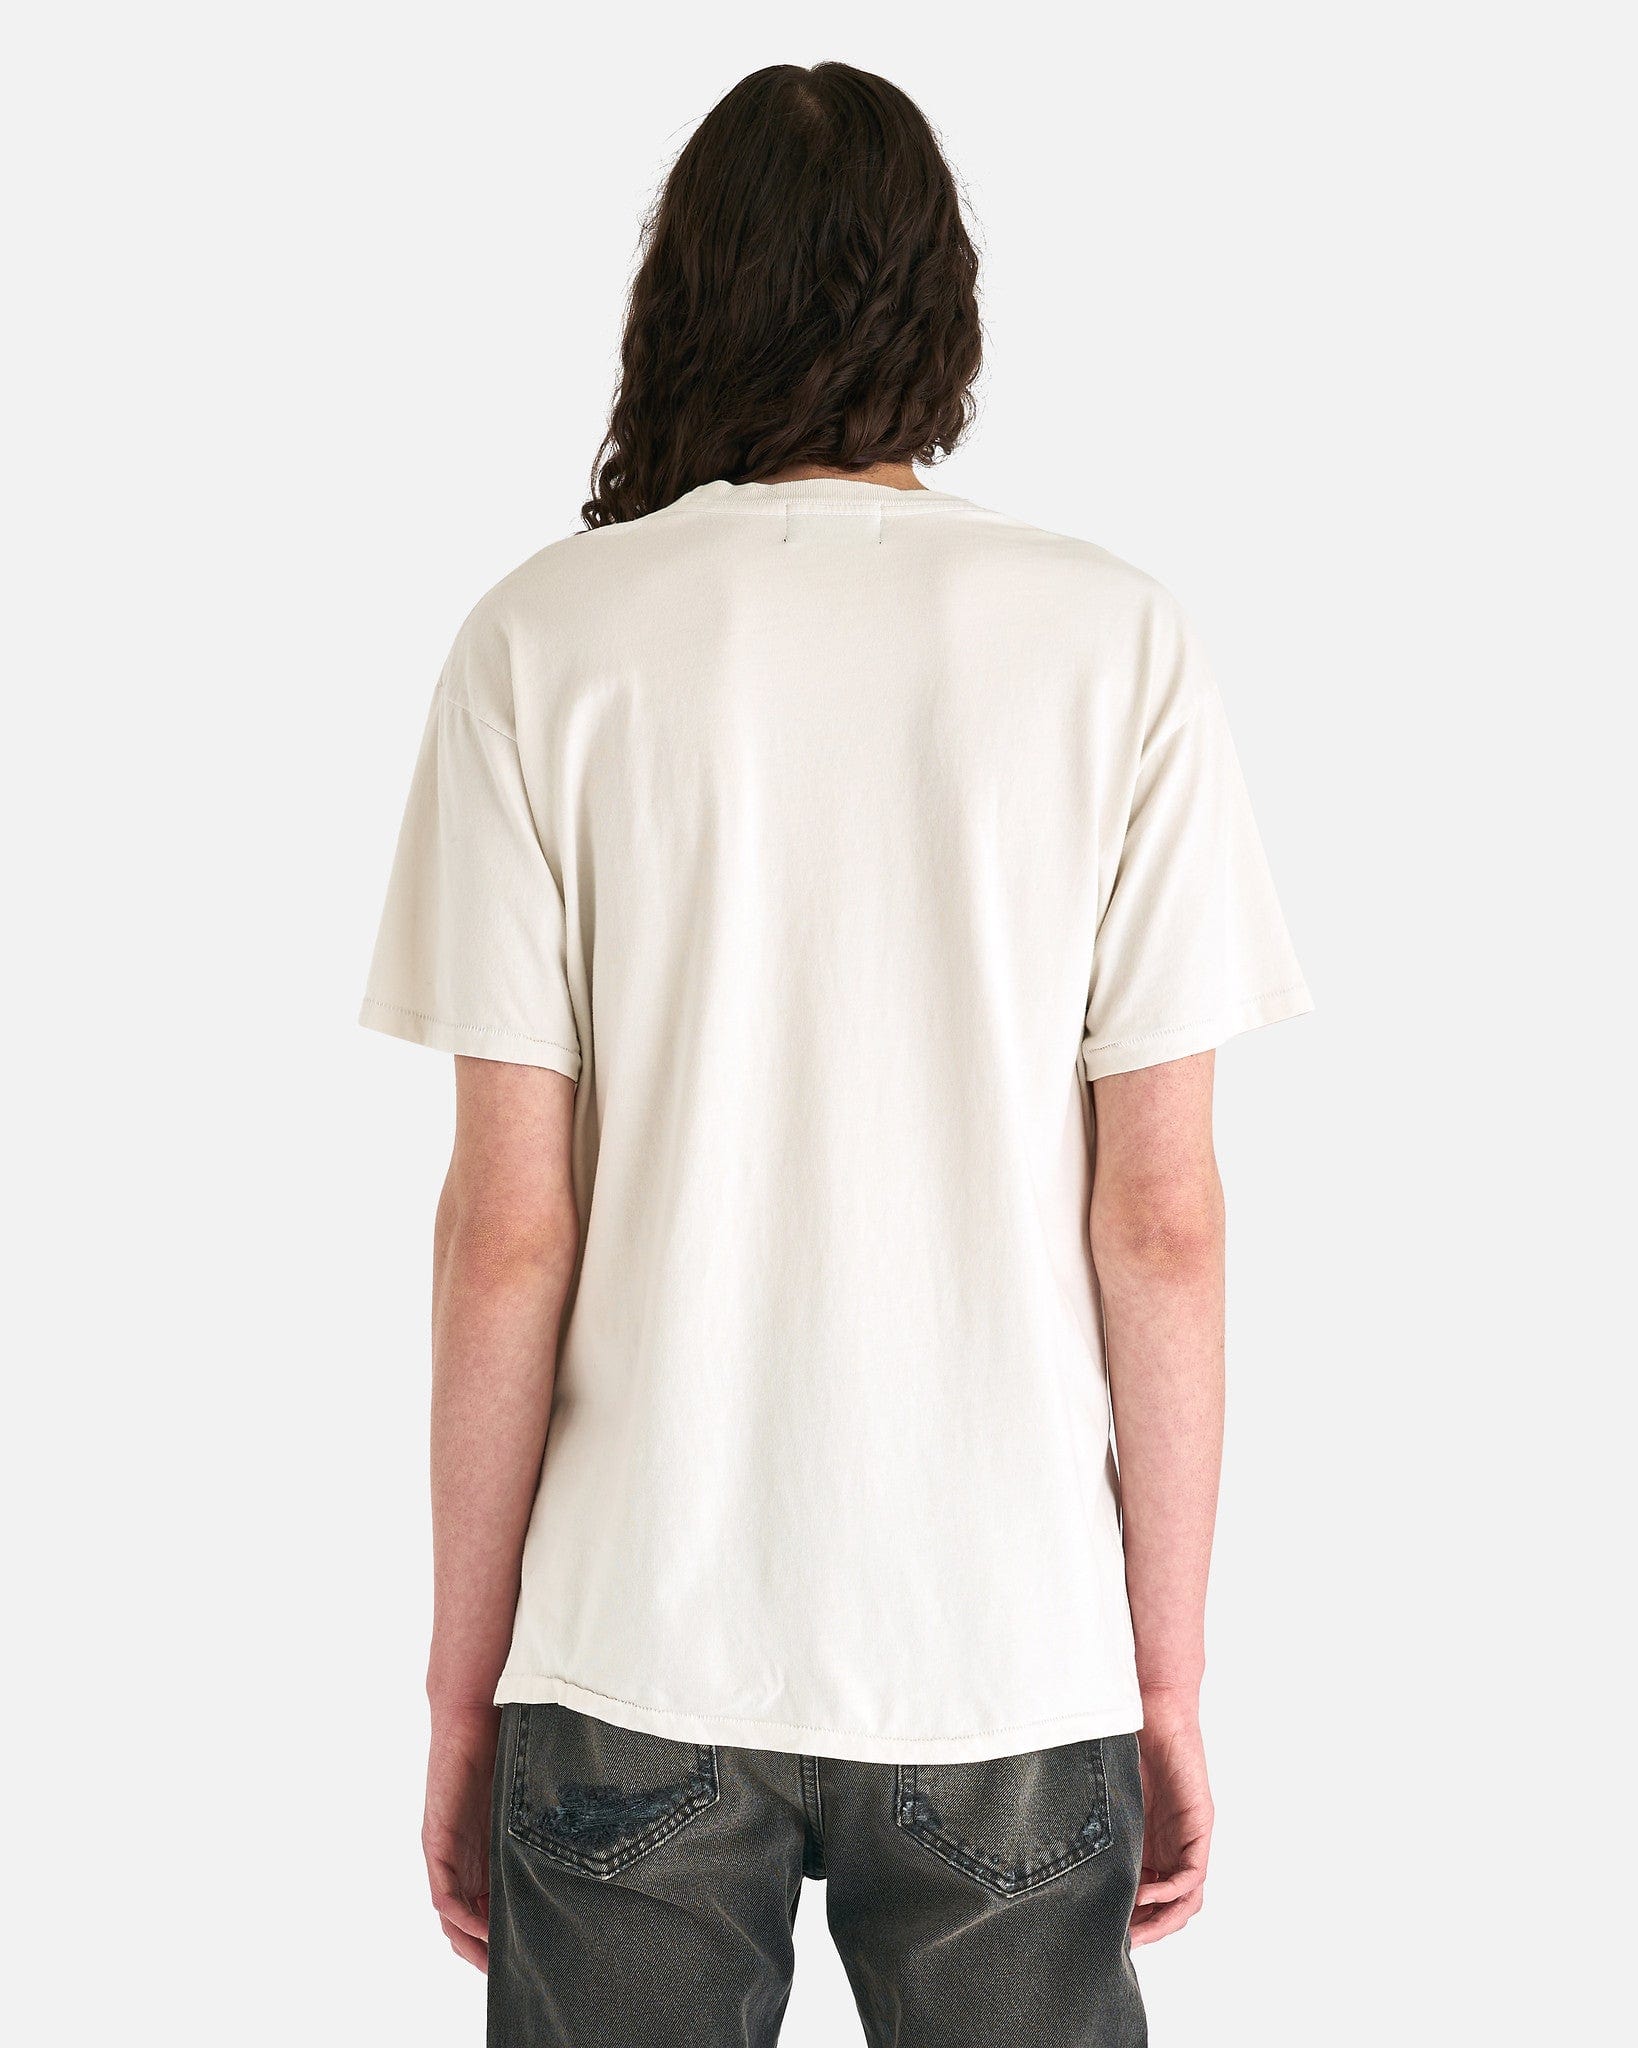 Fat Kid T-Shirt in Faded Ivory